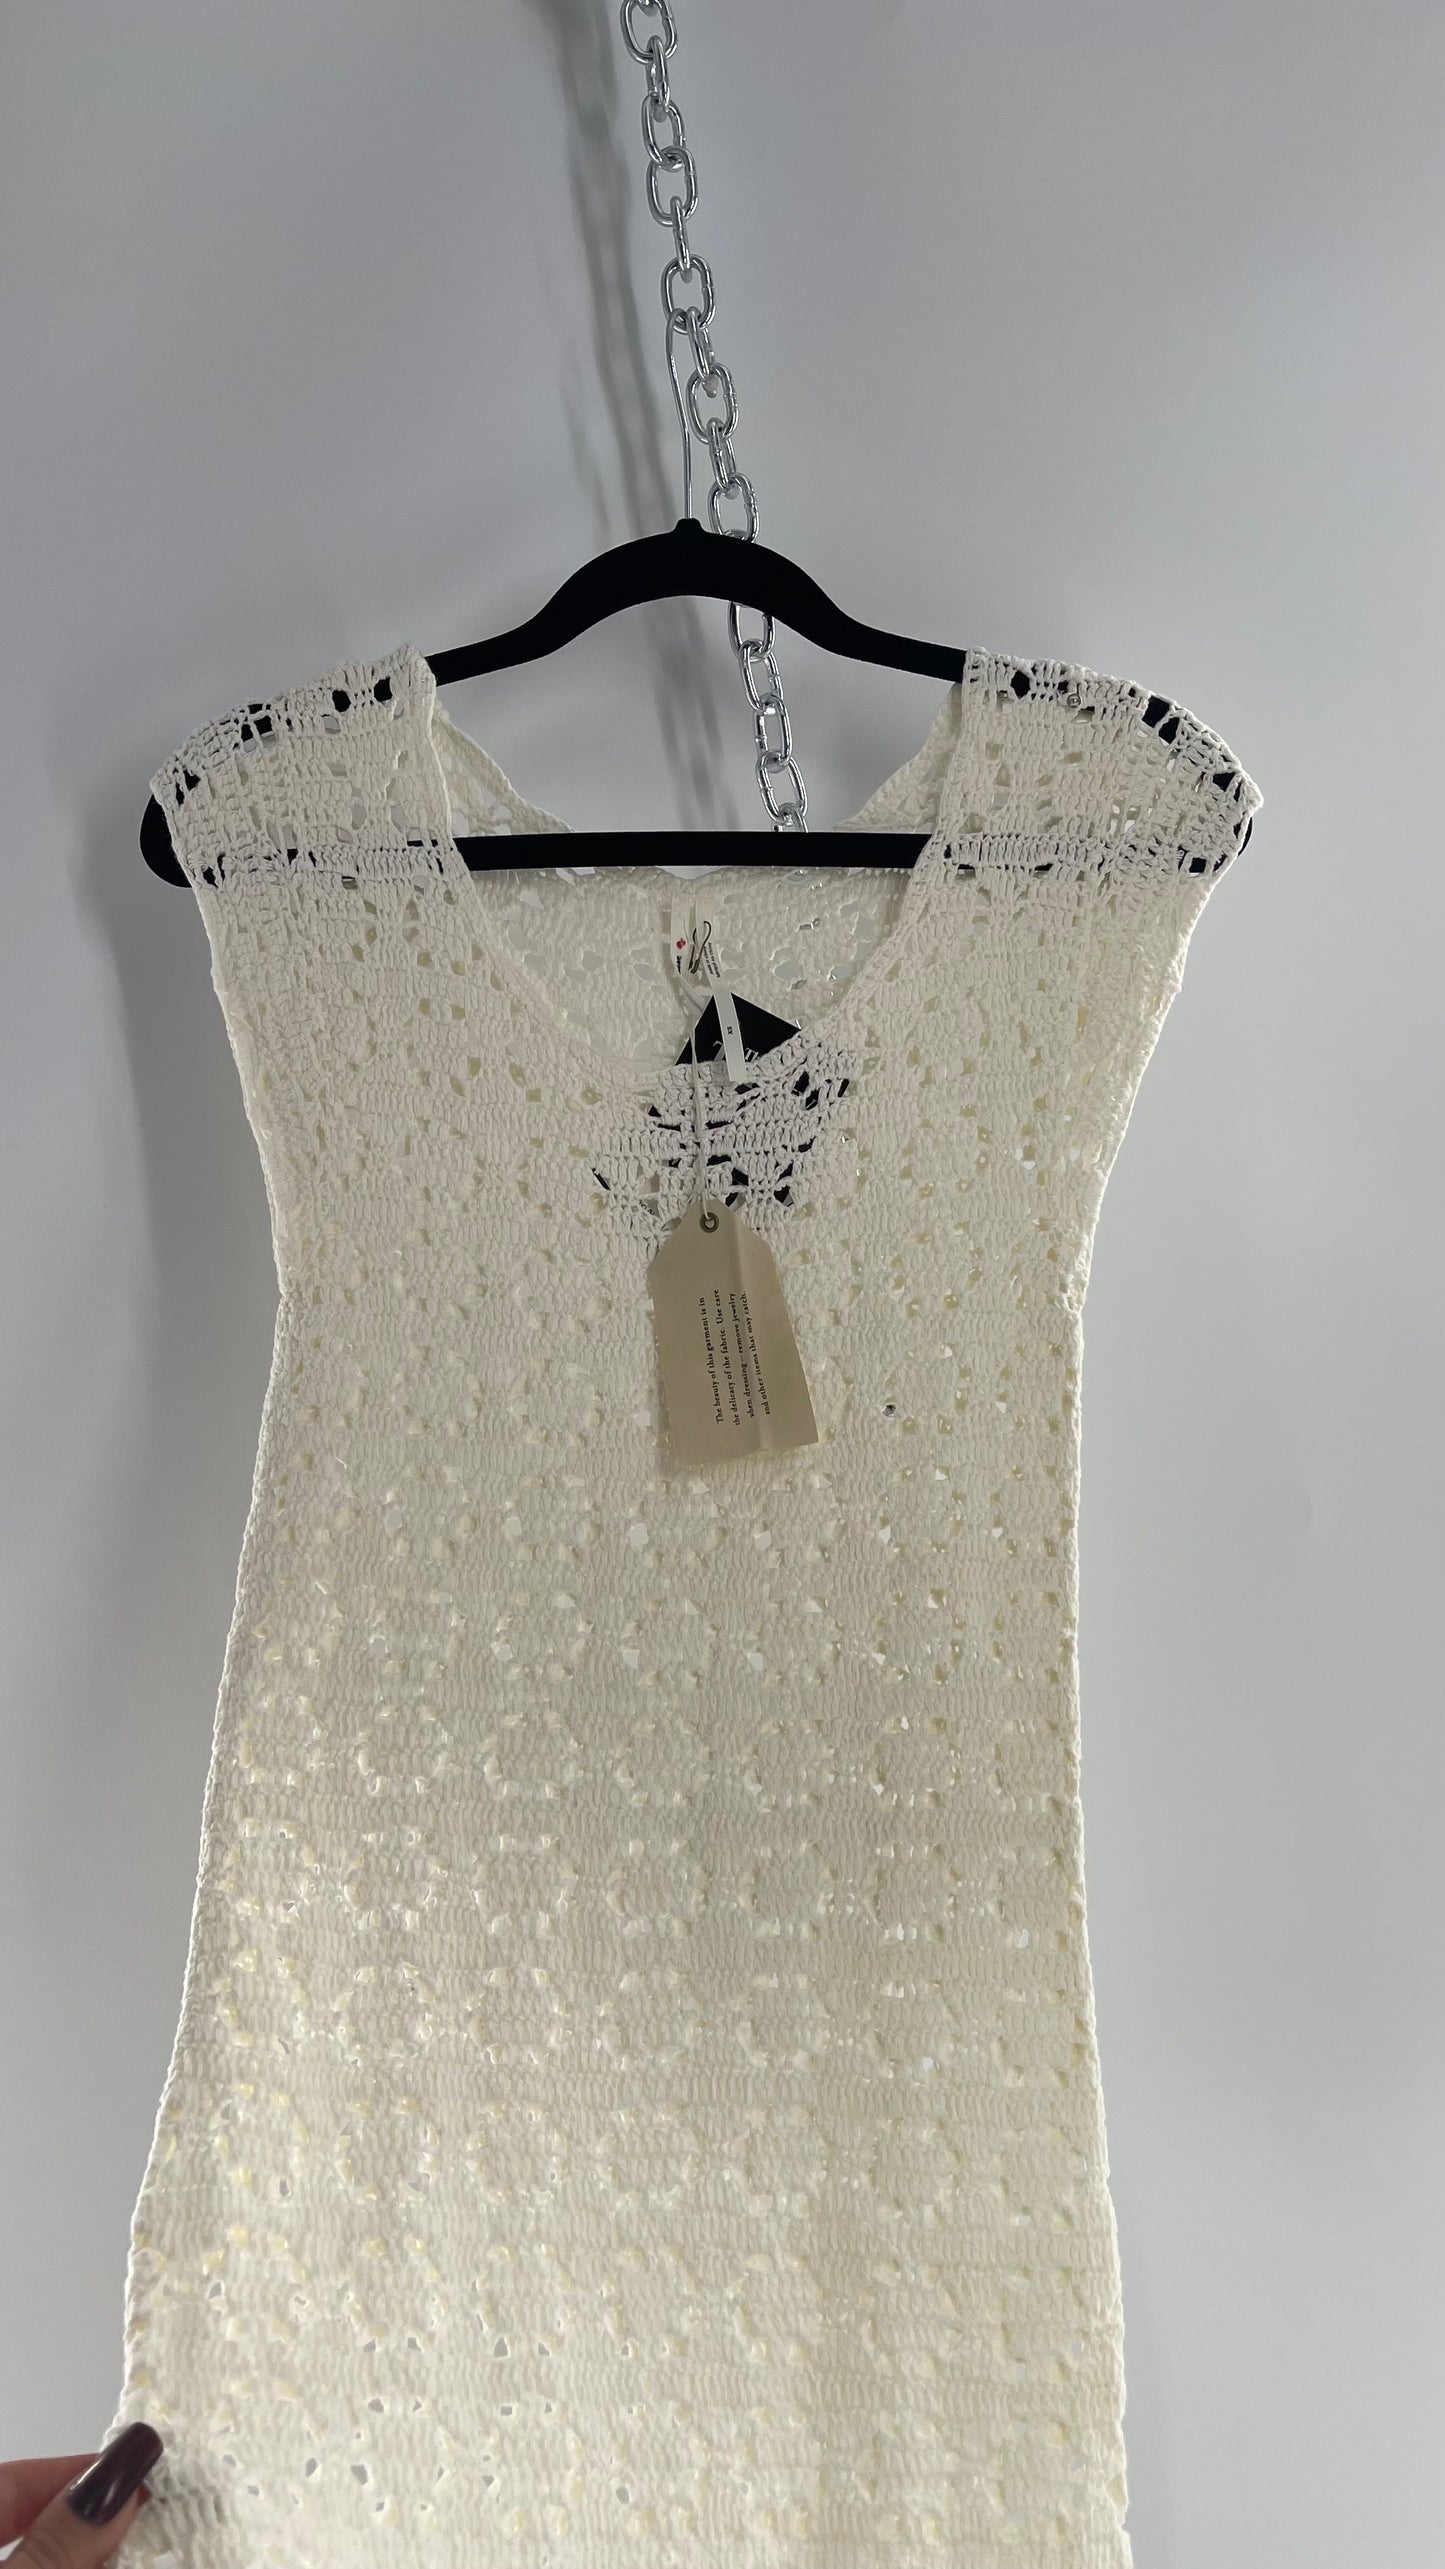 Anthropologie White Crochet Knit MIDI Dress with Tags Attached